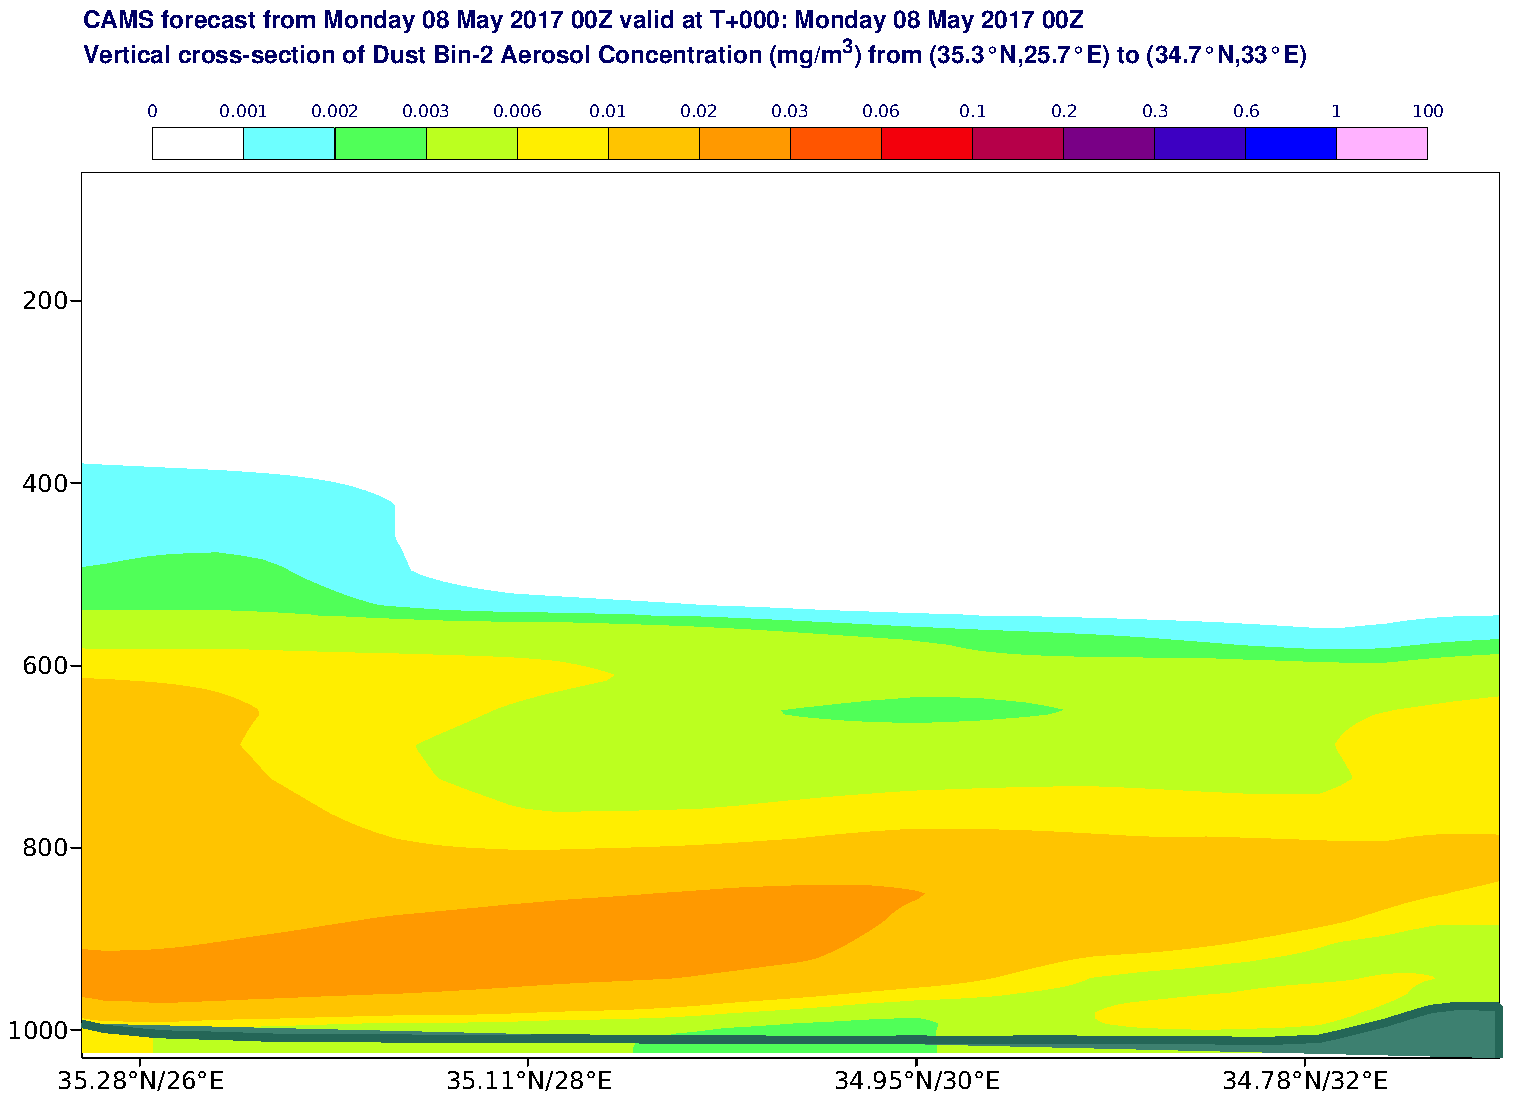 Vertical cross-section of Dust Bin-2 Aerosol Concentration (mg/m3) valid at T0 - 2017-05-08 00:00